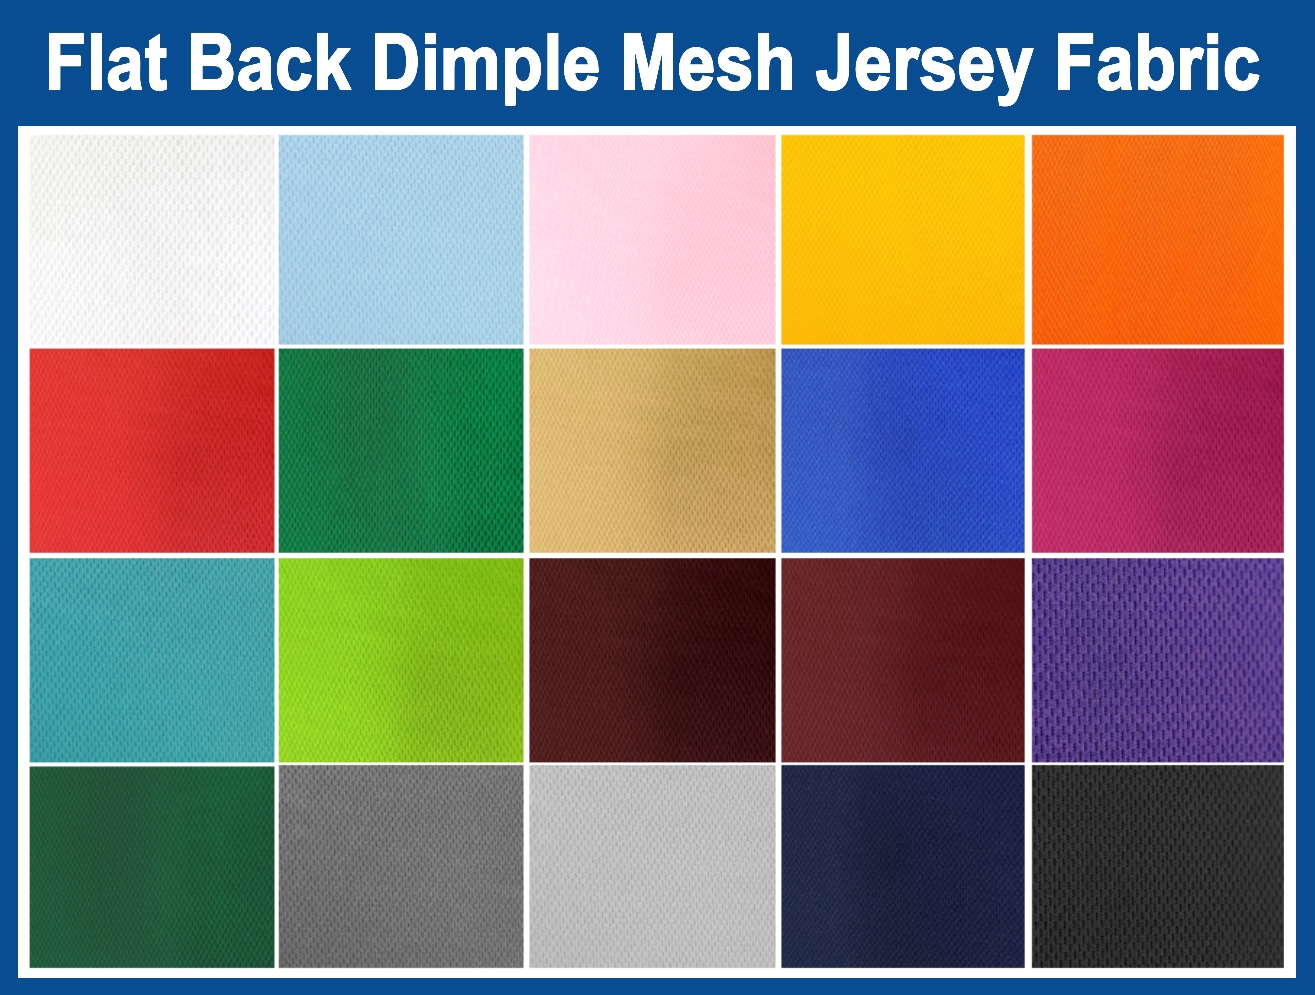 Flat Back Dimple Mesh Jersey Fabric